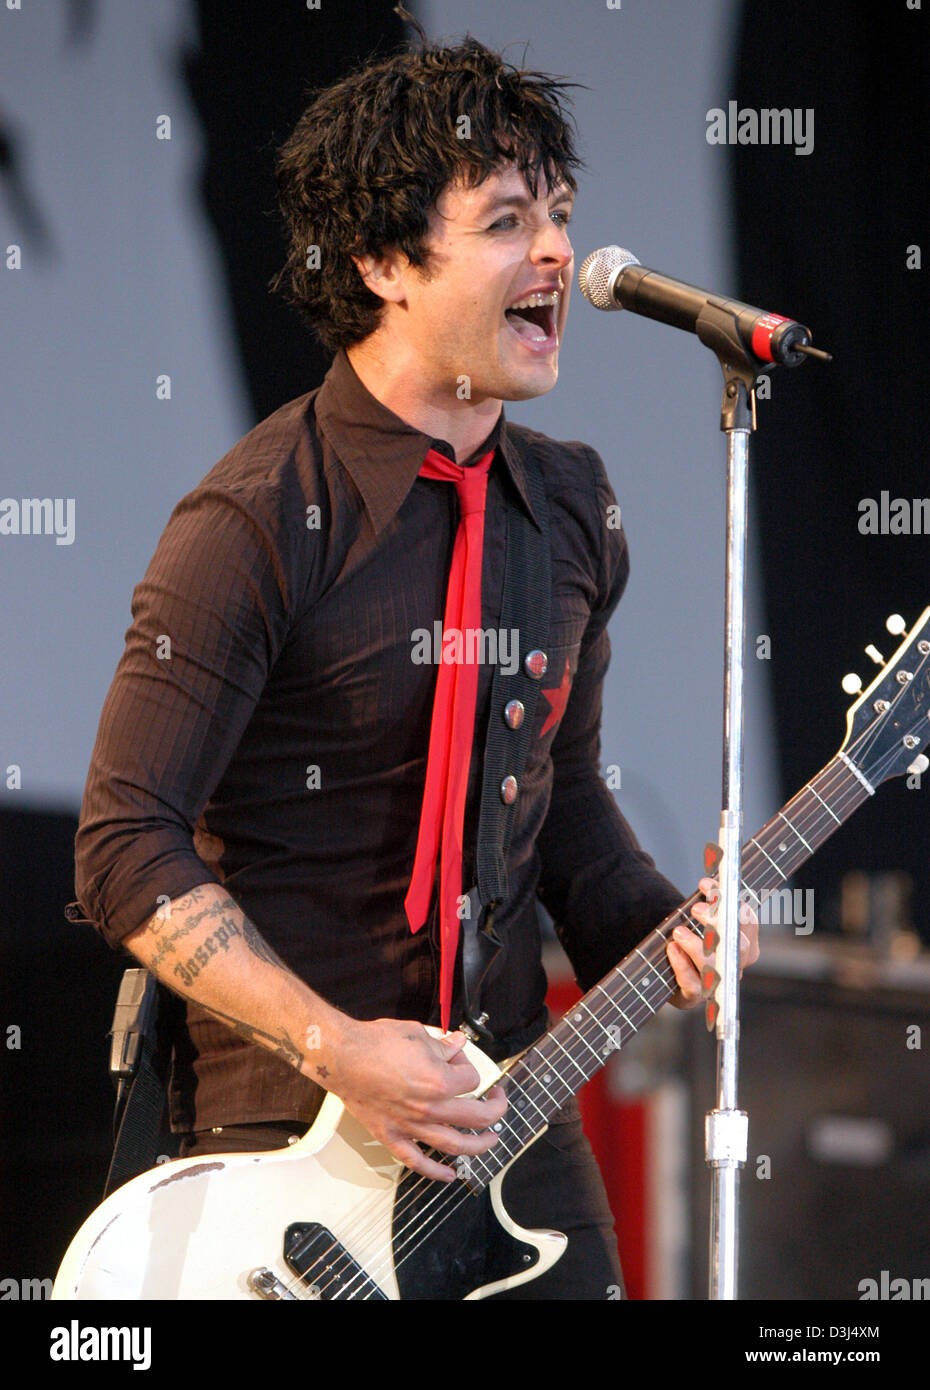 (dpa) - Singer Billie Joe Armstrong and the US American band Green Day rock the 70,000 visitors at 'Rock am Ring' at the Nuerburgring, Germany, 3 June 2005. The three day Music Festival boasts more than 90 bands until its conlusion on Sunday. Already for the first day 60,000 visitors were expected. Stock Photo